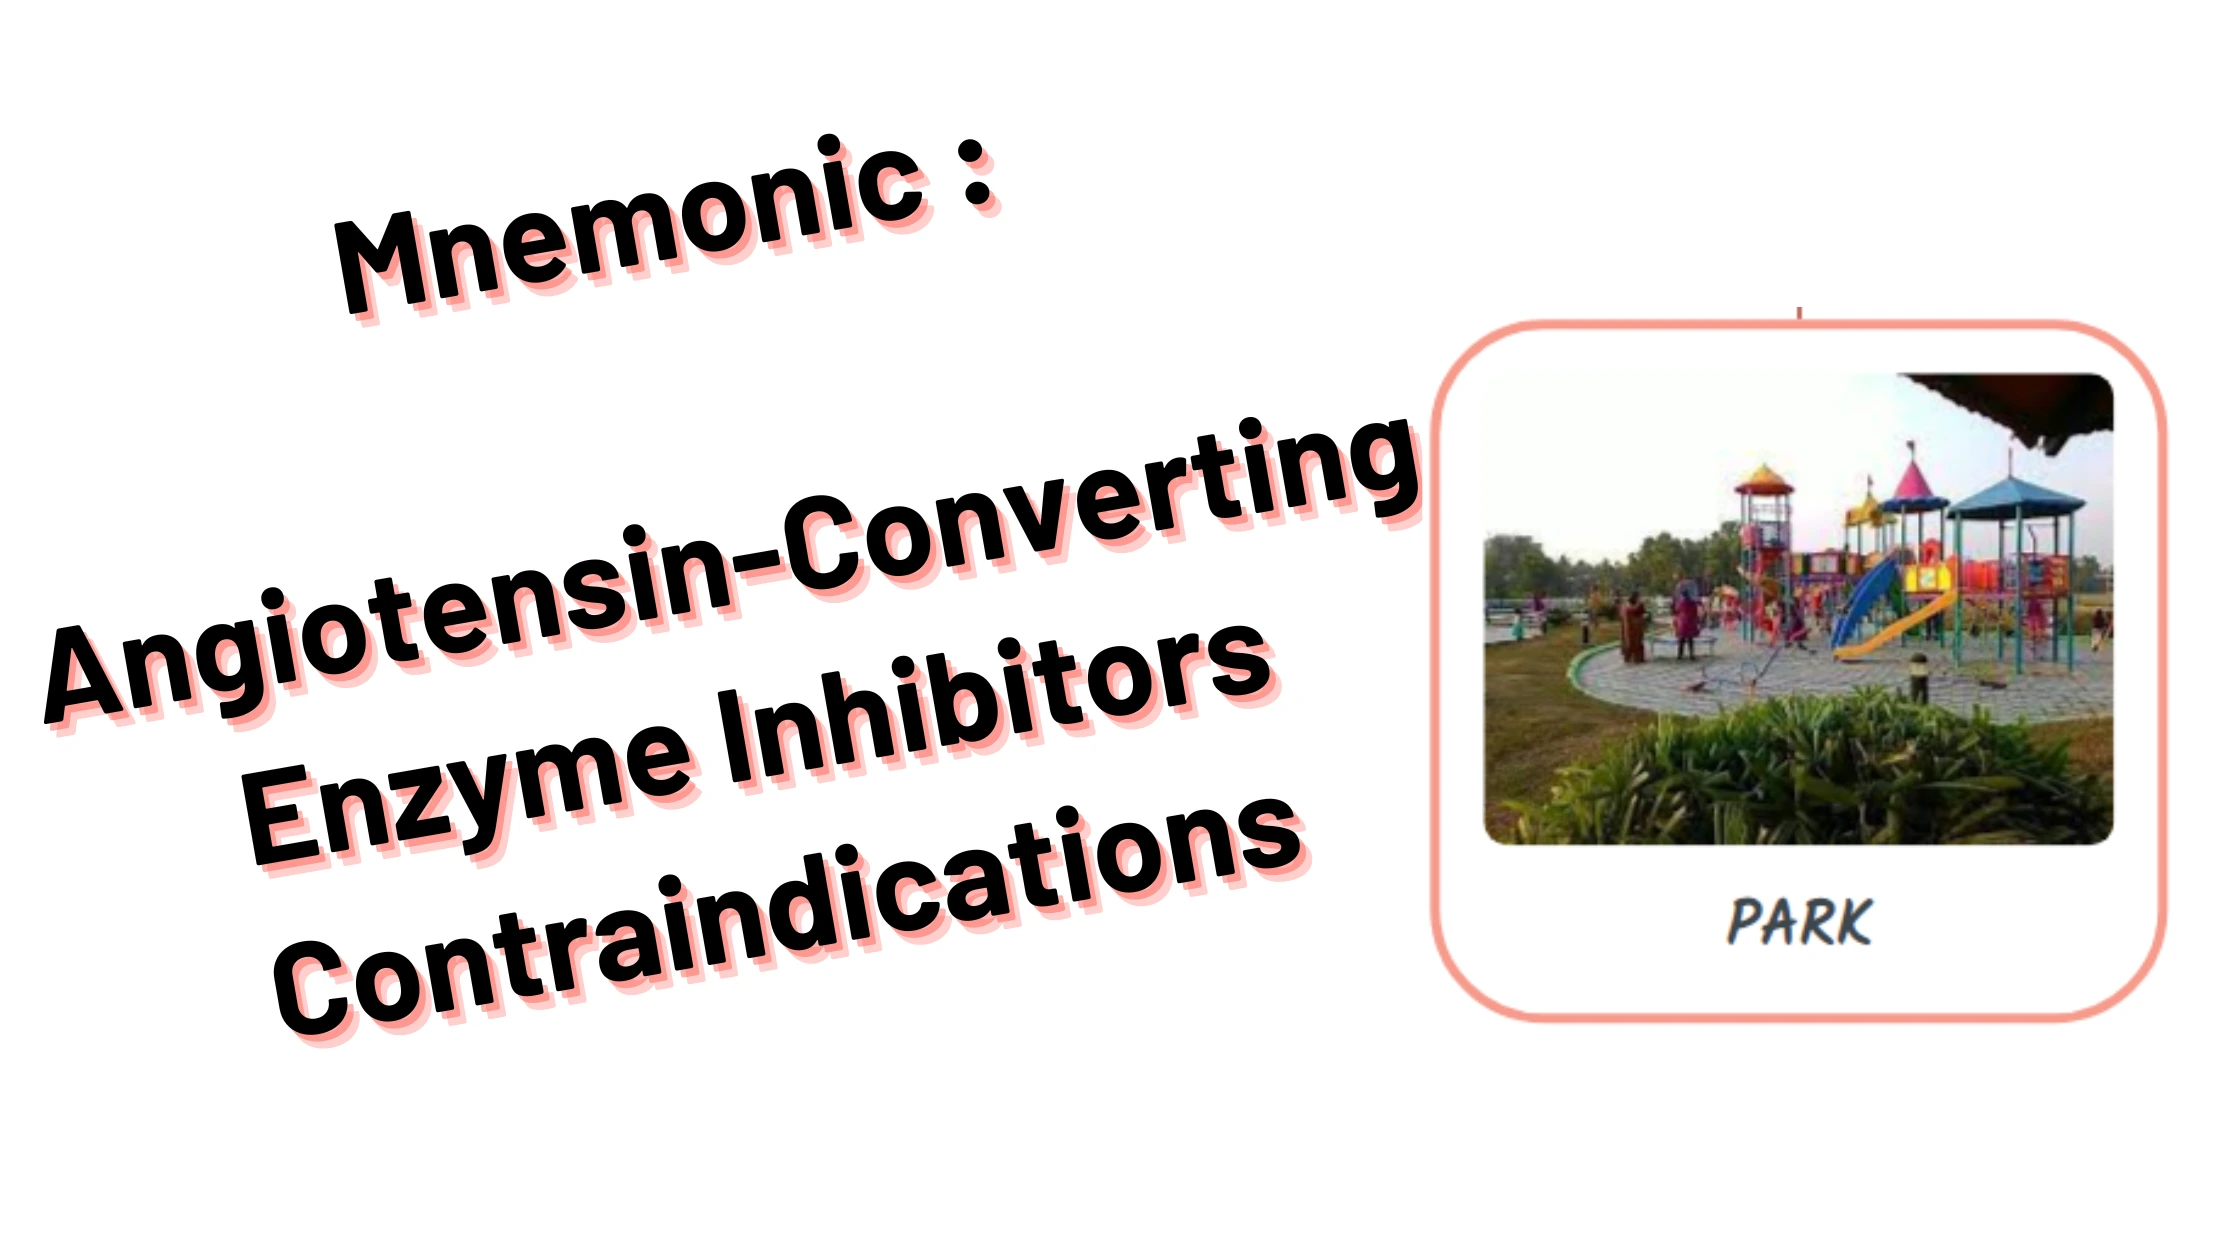 medical Mnemonic _ Angiotensin-Converting Enzyme Inhibitors Contraindications